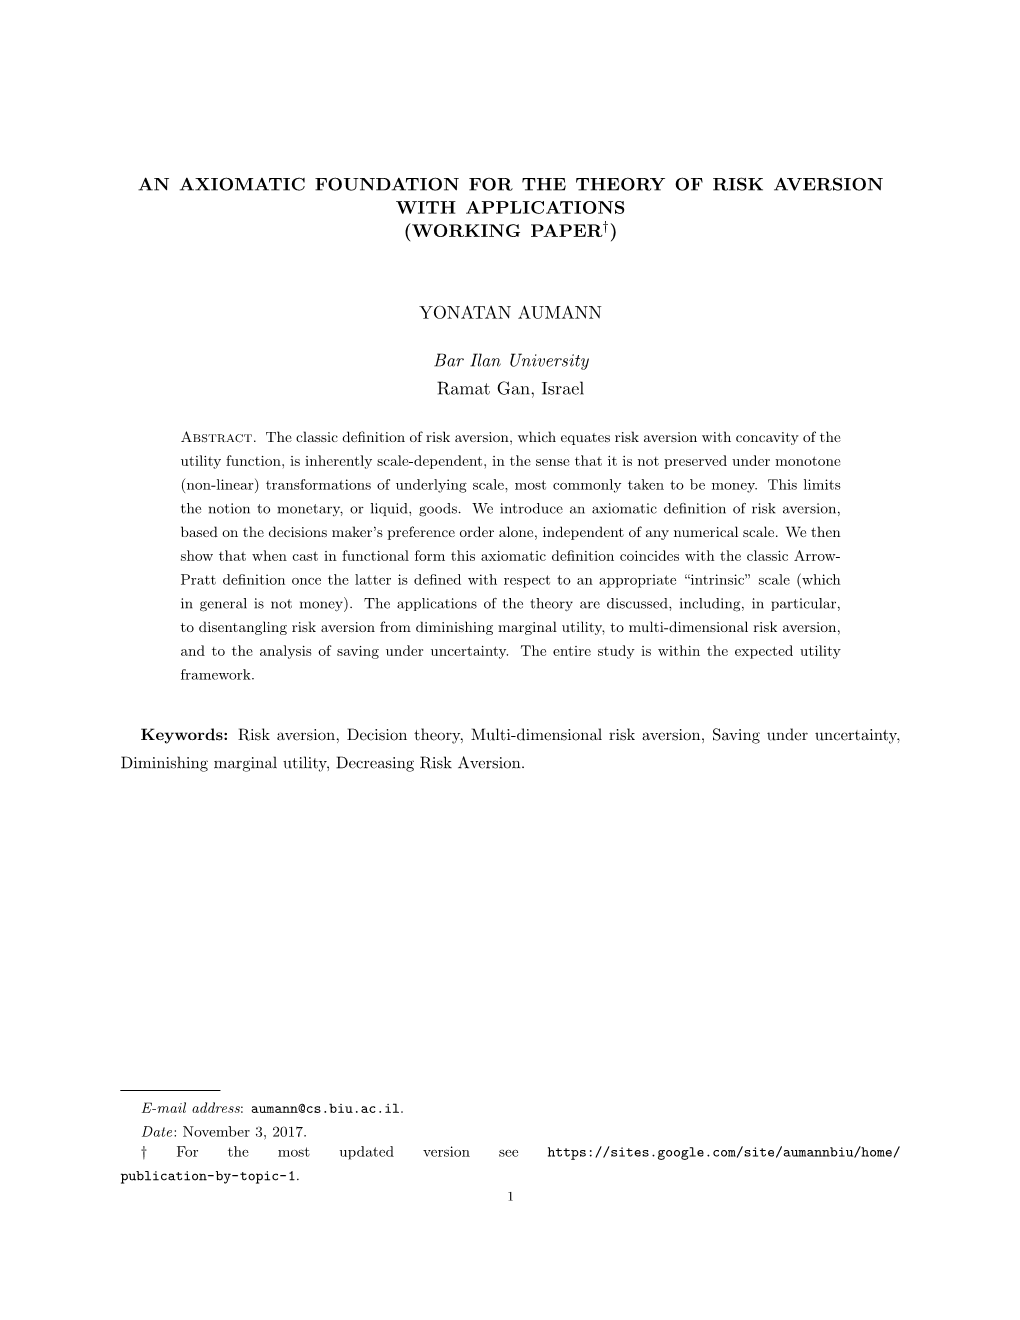 An Axiomatic Foundation for the Theory of Risk Aversion with Applications (Working Paper†)